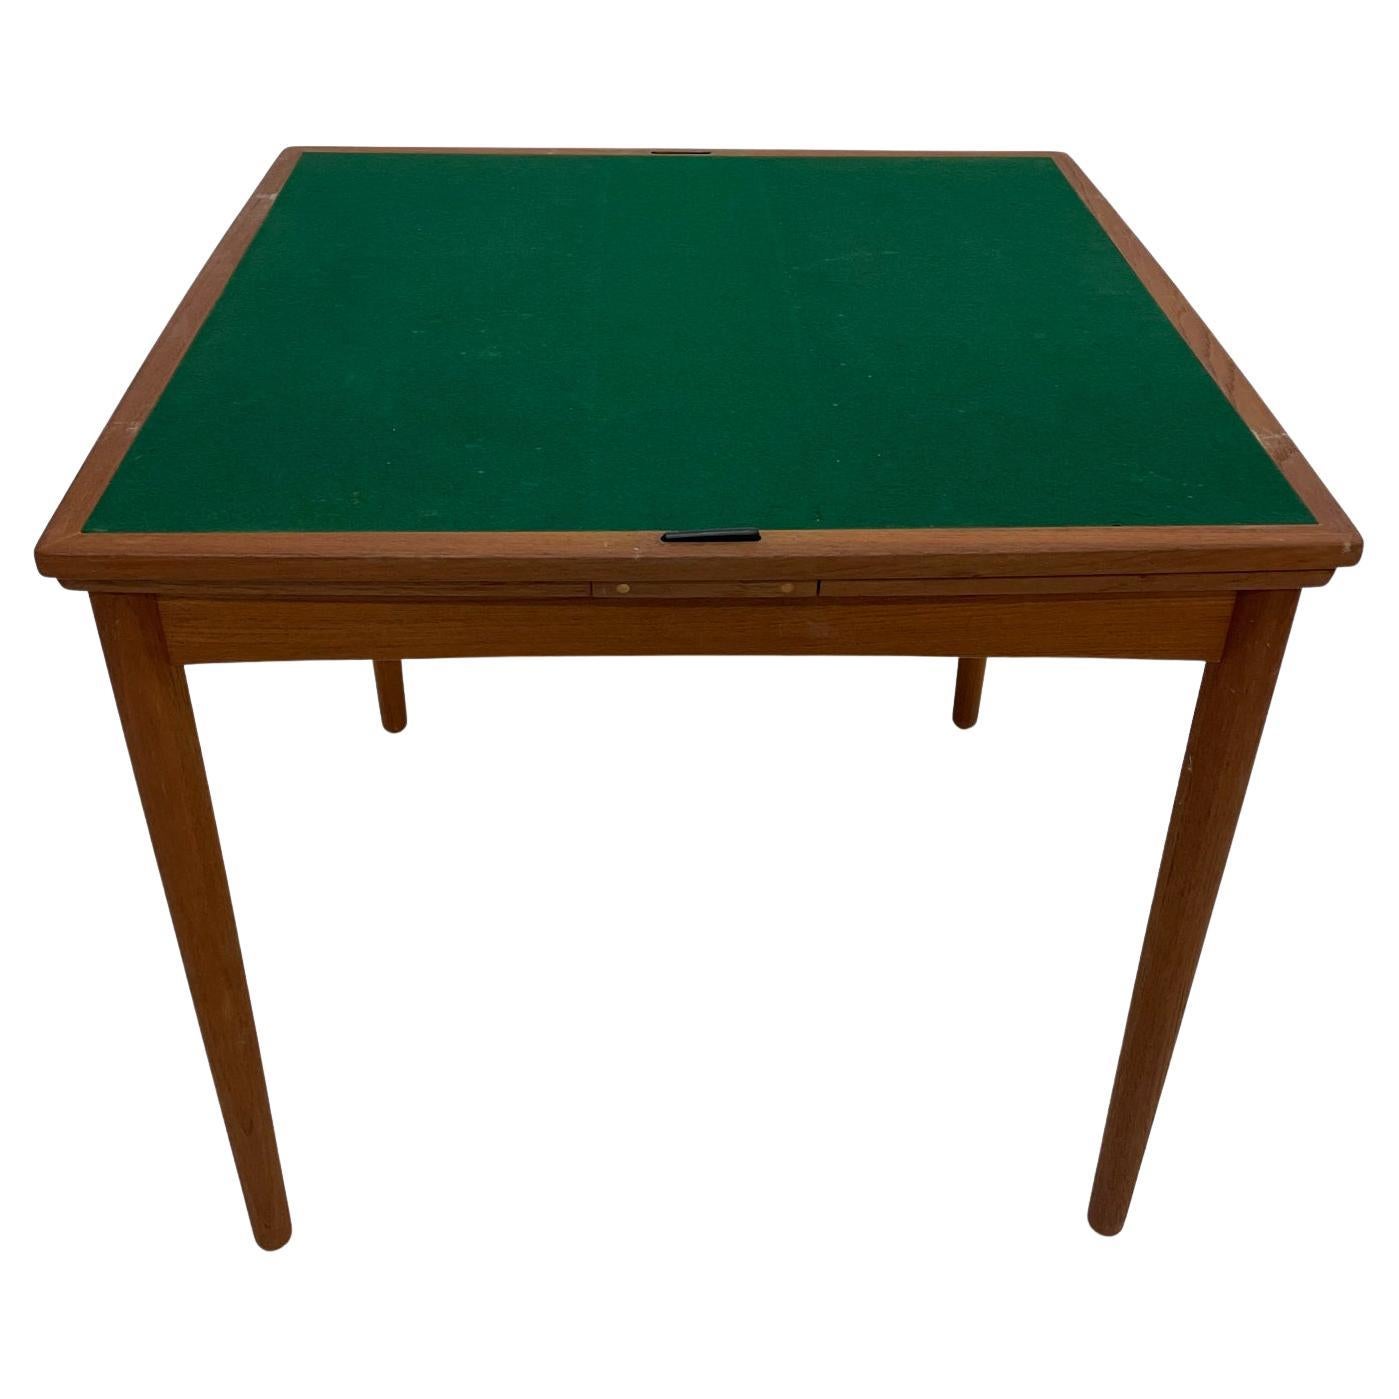 Game Table
Danish Modern Teakwood Game Table 1960s Denmark
Reversible top with green felt for gaming.
Attribution Brdr. Furbo stamped with Danish Control Seal. 
Measures: 56.5 fully extended x 31.5 D x 28.13 tall
Original preowned vintage